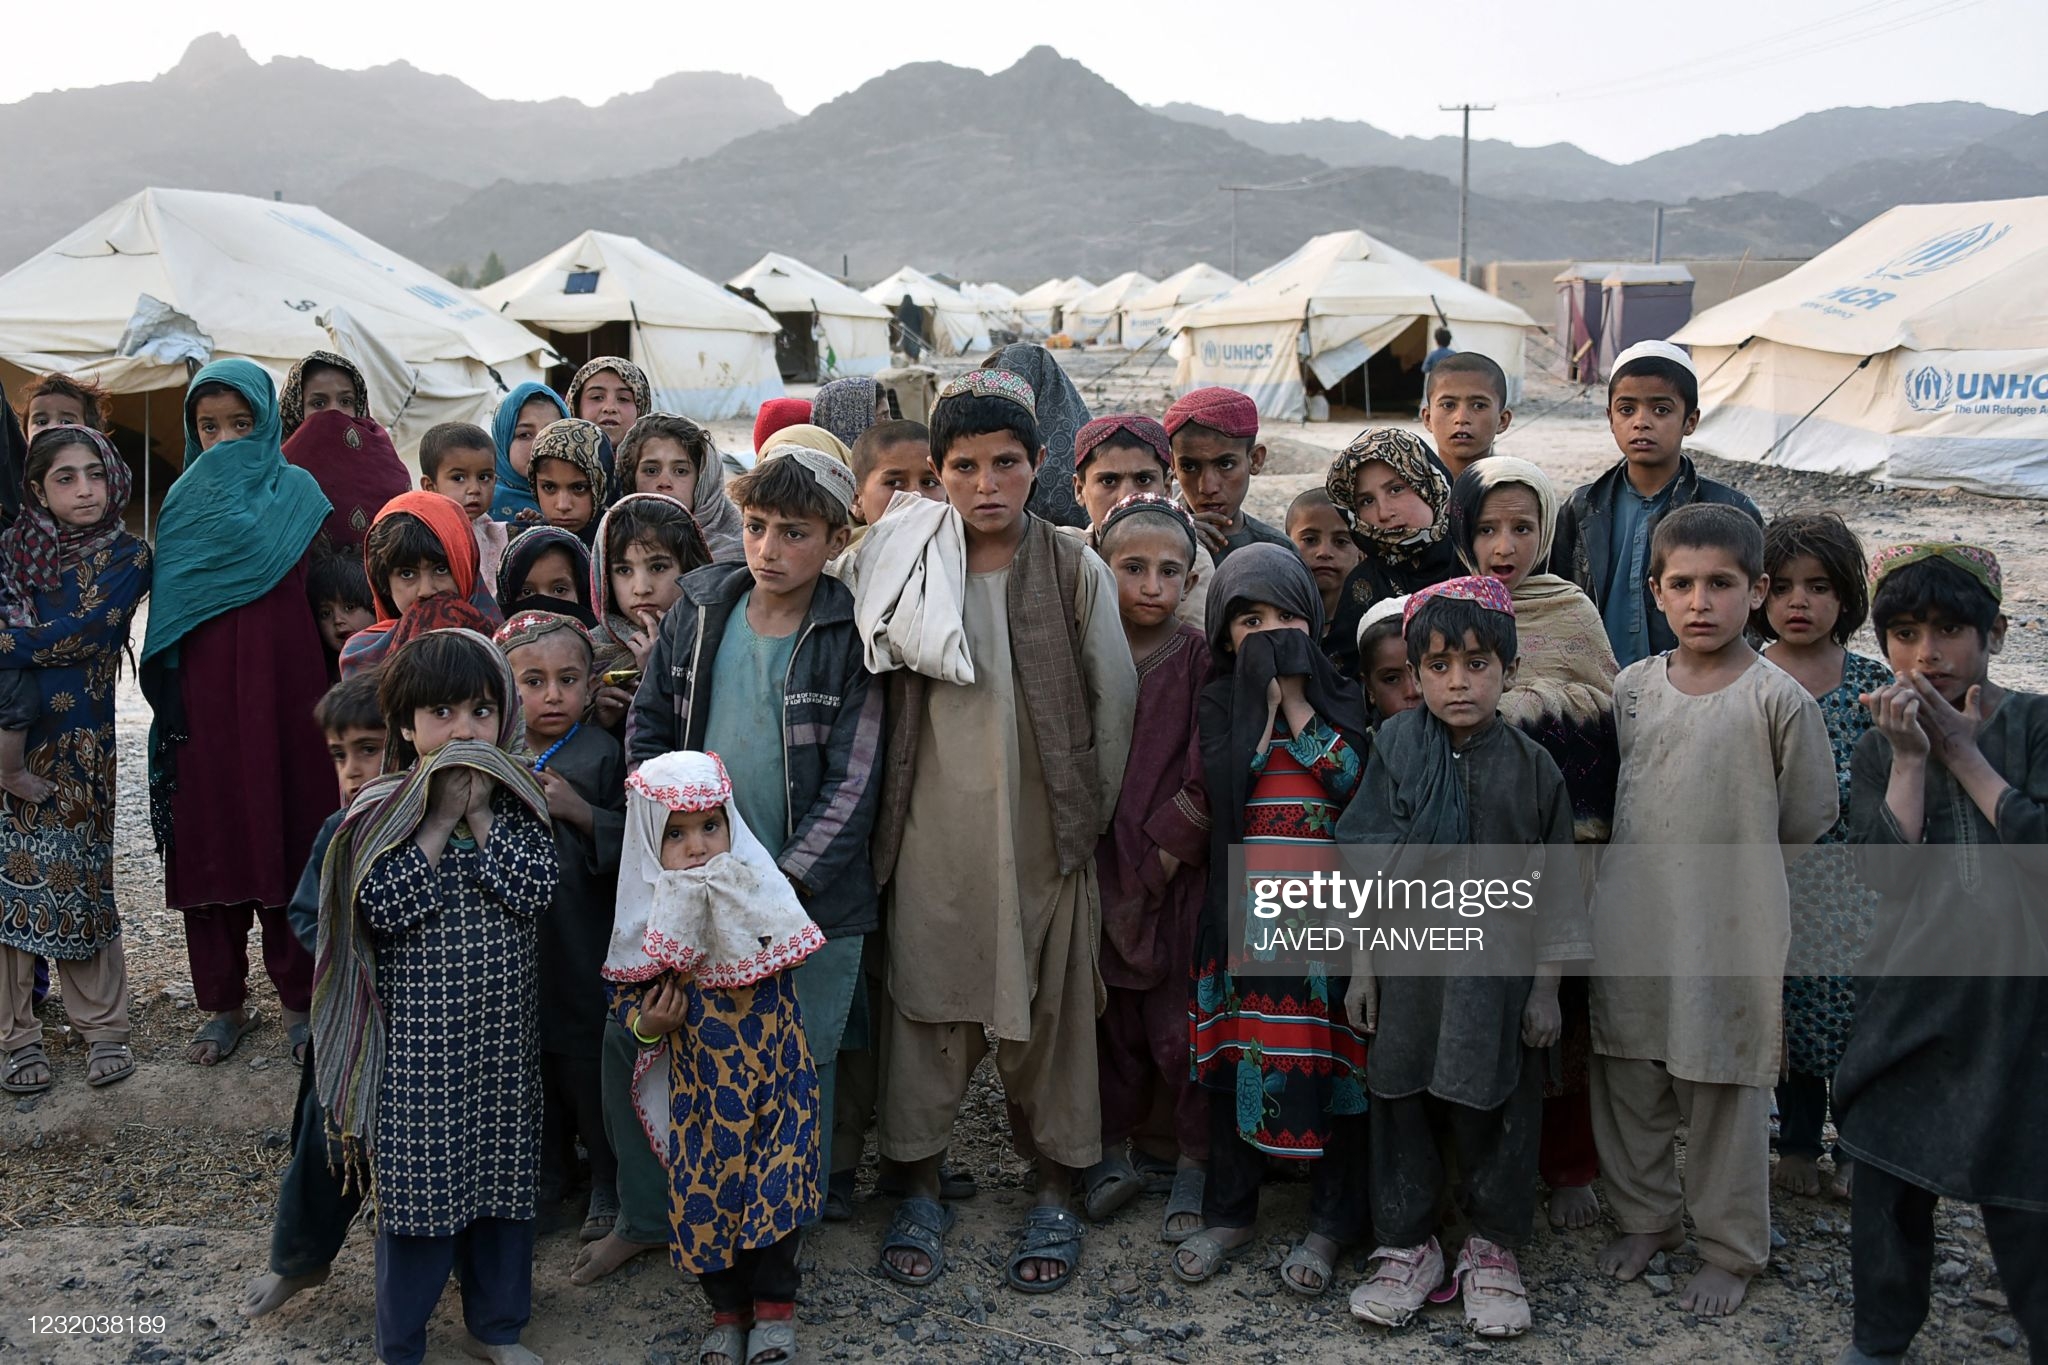 Millions Of Afghans Internally Displaced Amid Growing Humanitarian Crisis In Afghanistan